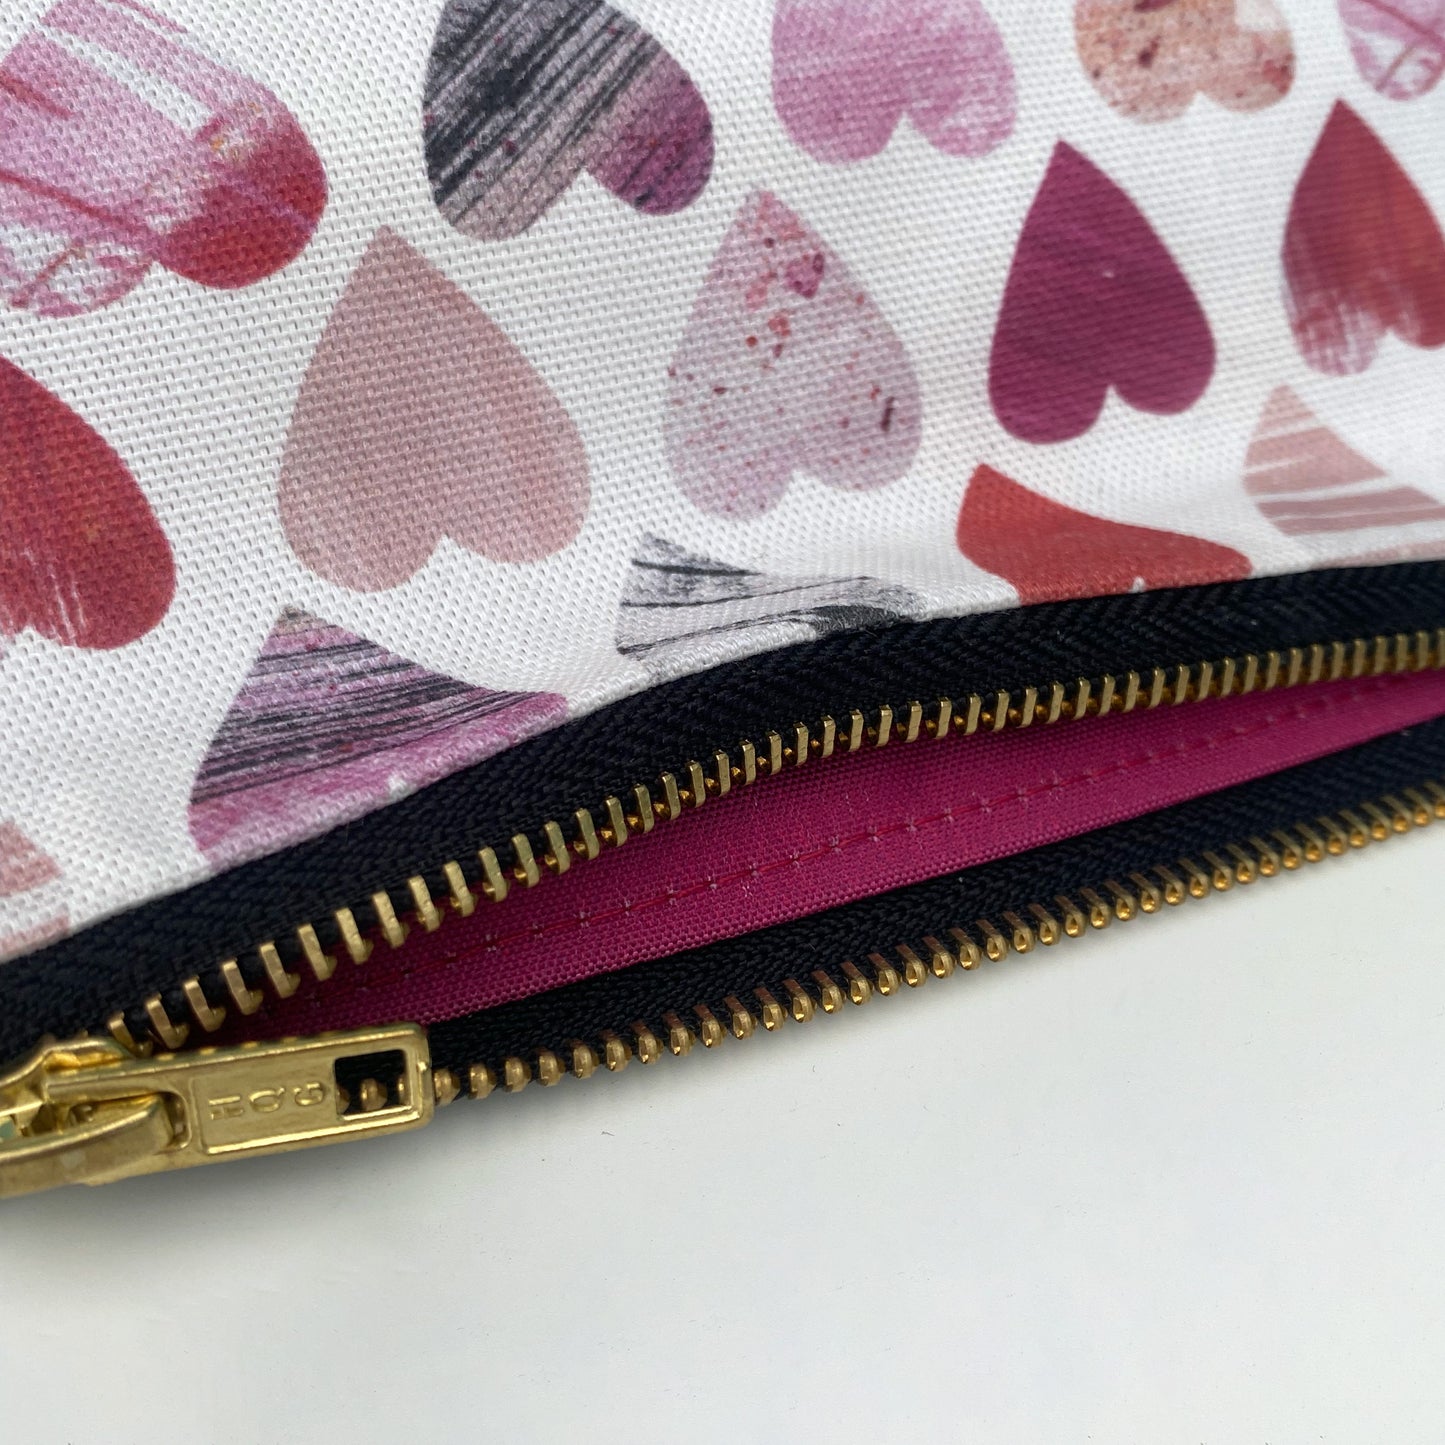 Close up of a small Hearts wash bag showing the textured printed hearts pattern, gold metal zip and bright pink lining.